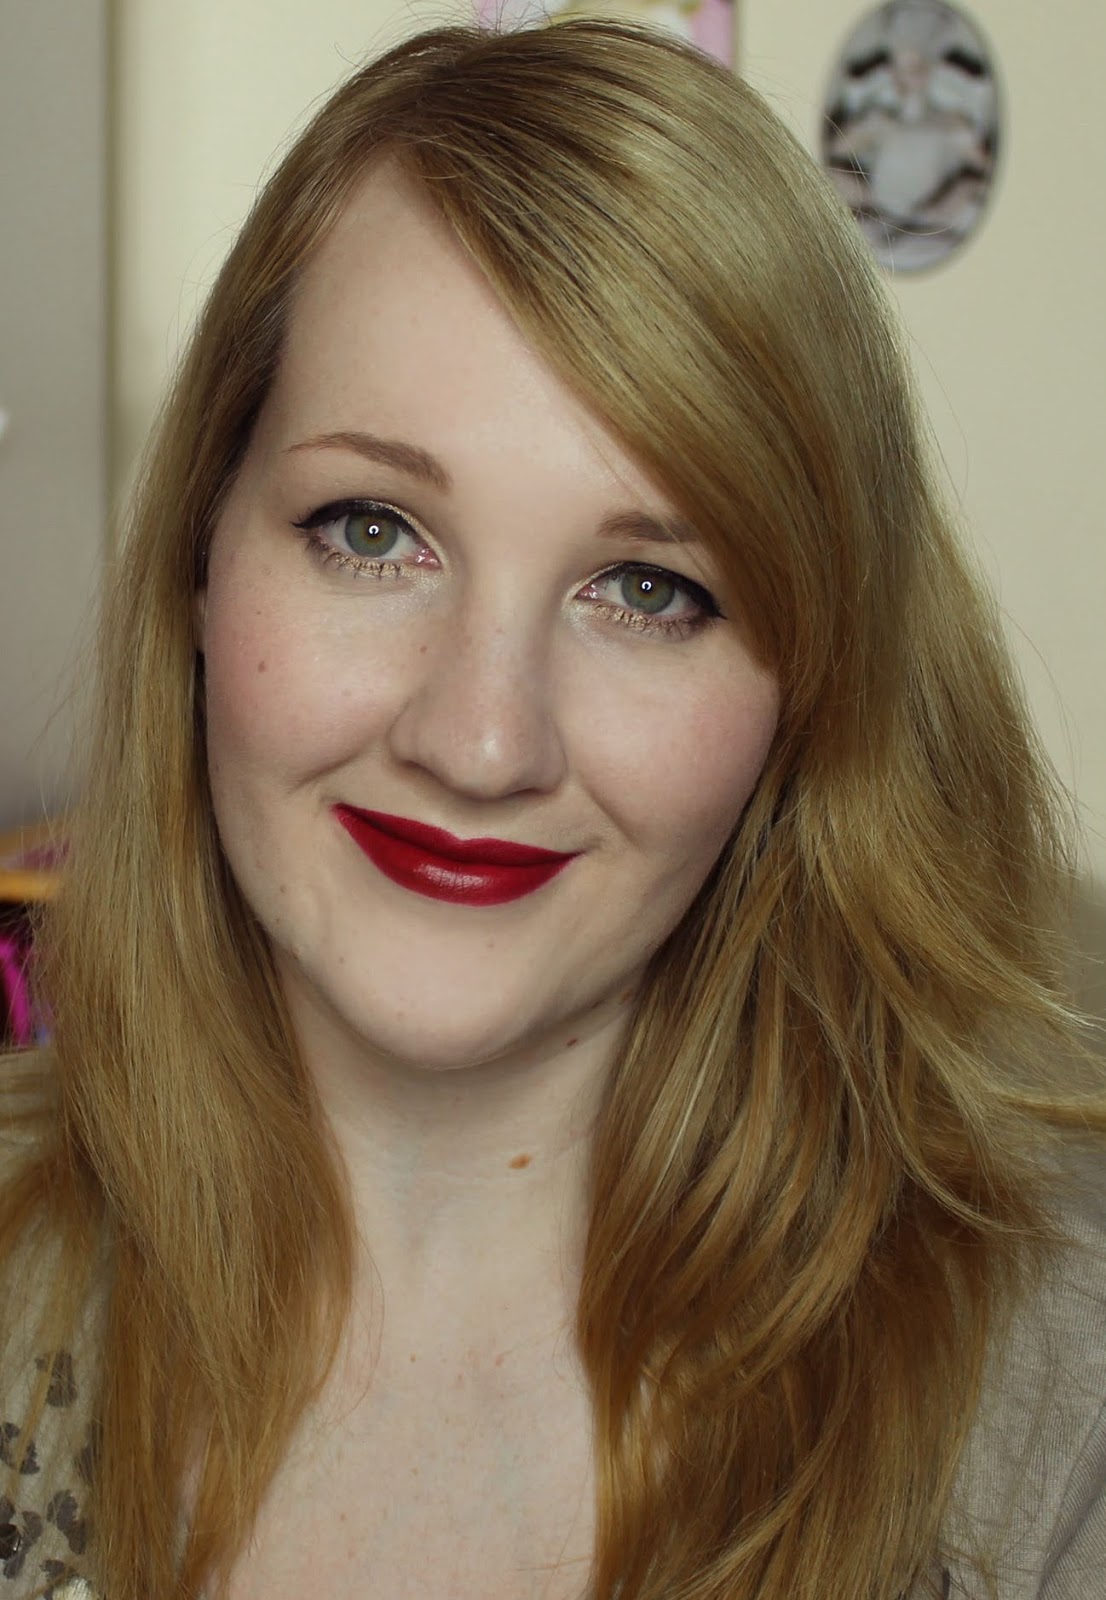 MAC Heirloom Mix Lipstick - Rebel Swatches & Review